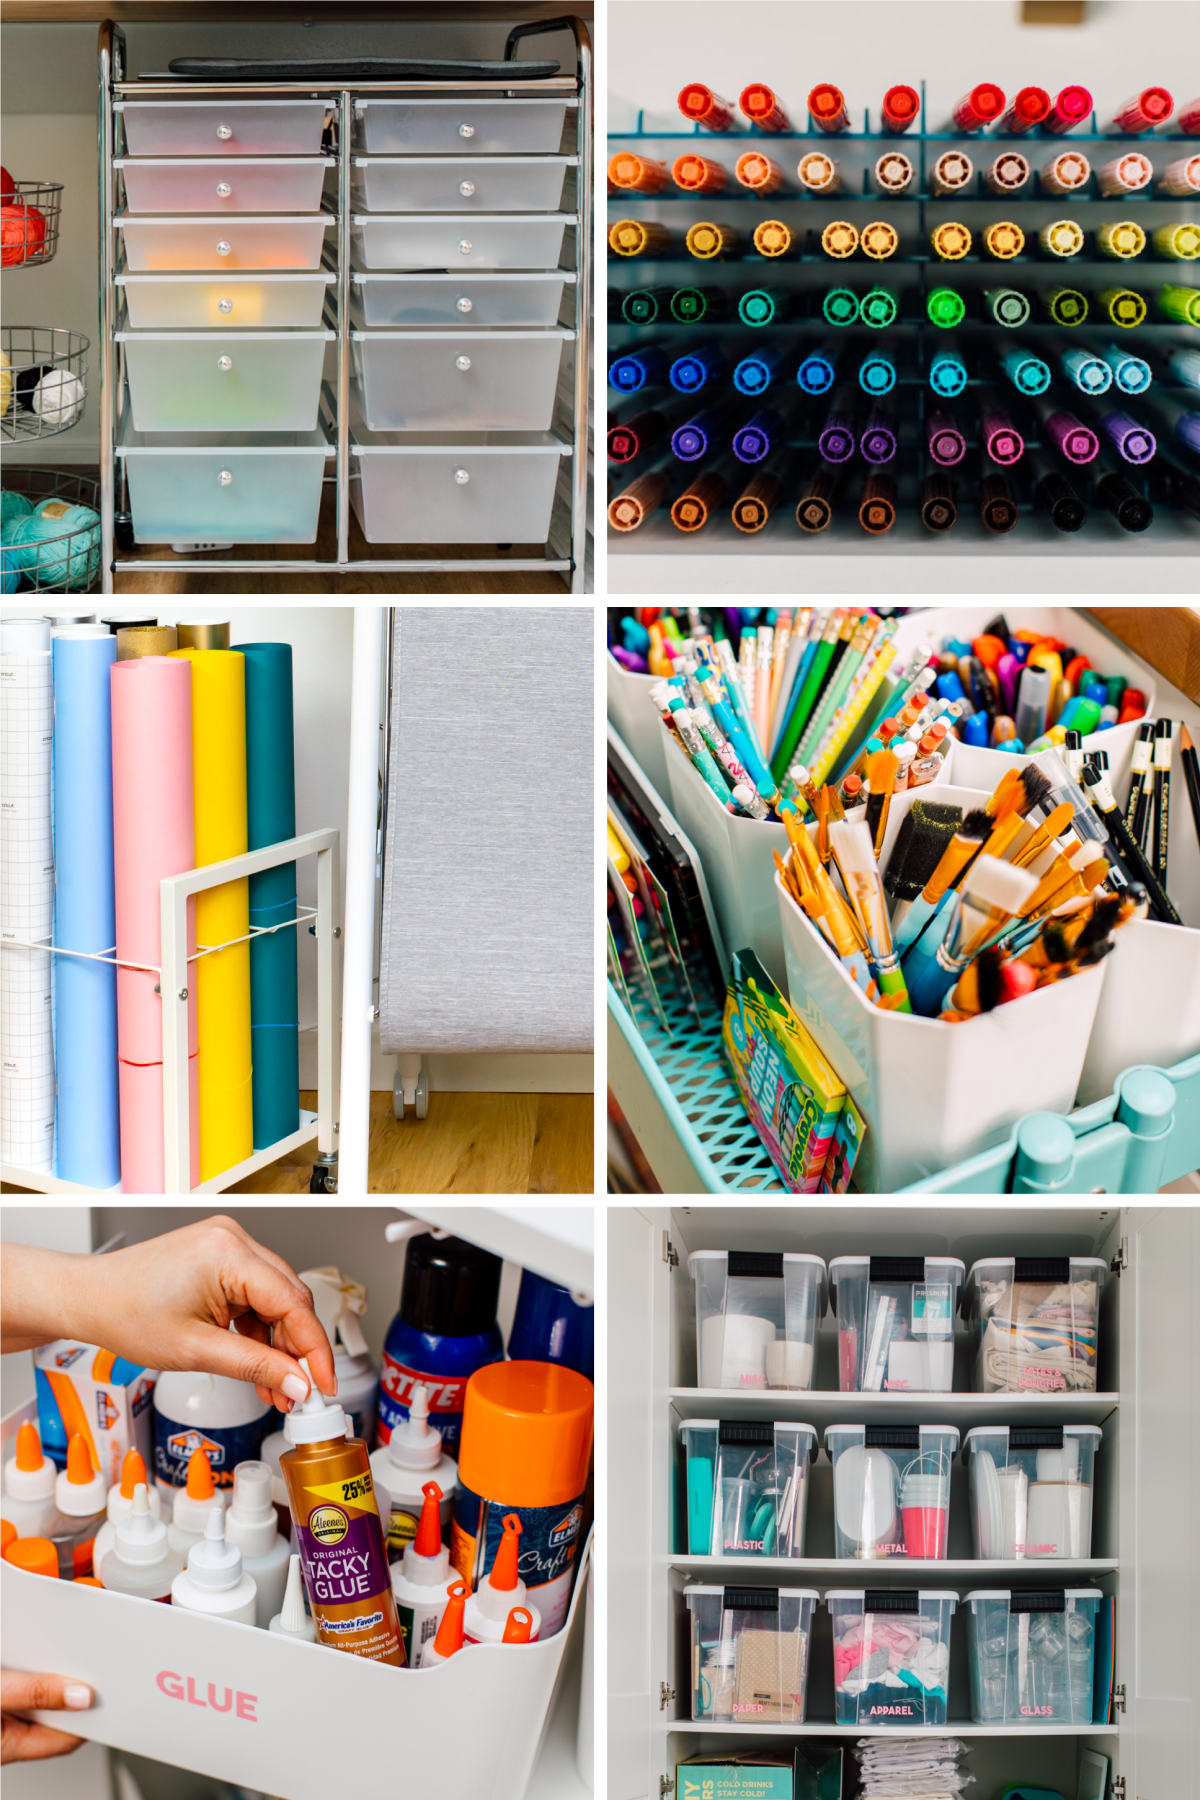 25 of the Best Crafting Blanks From IKEA - The Homes I Have Made